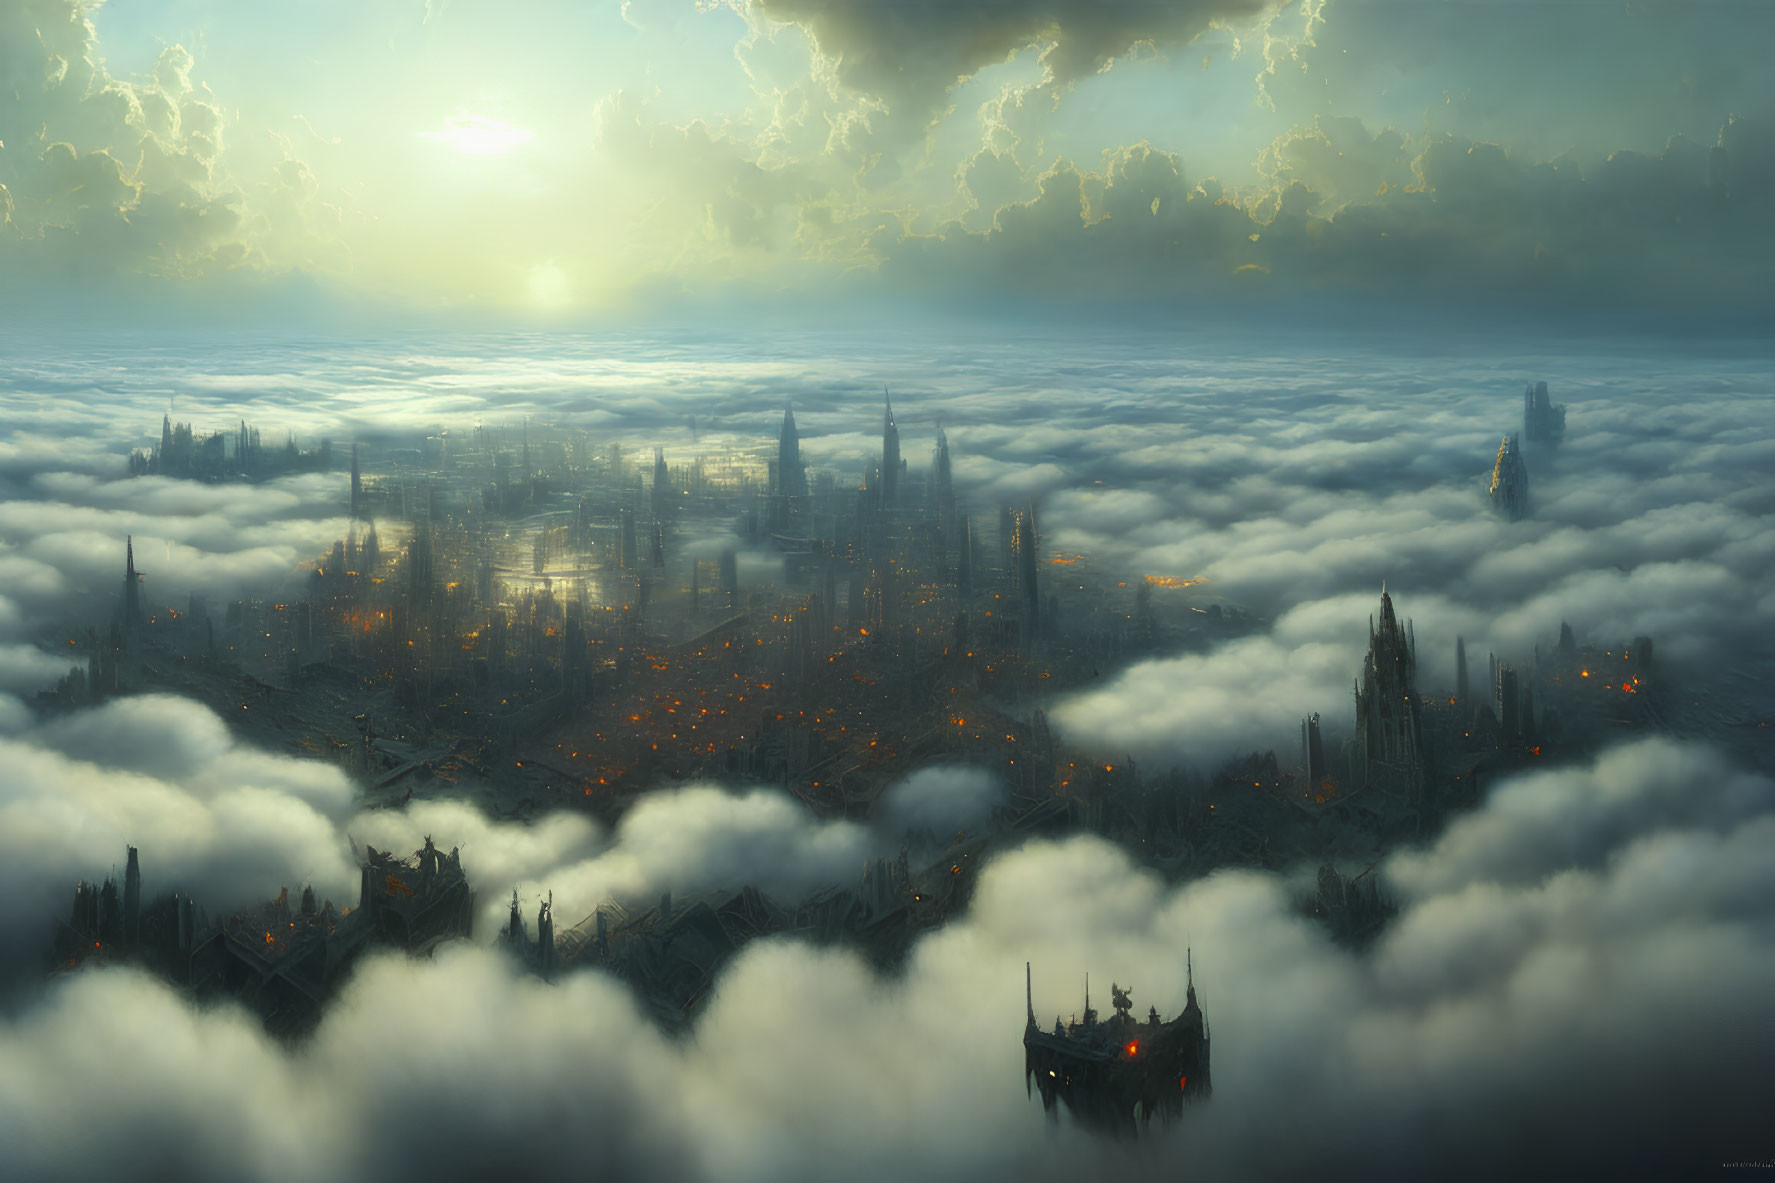 Cityscape at Dusk with Clouds, Lights, Sunset, and Airships